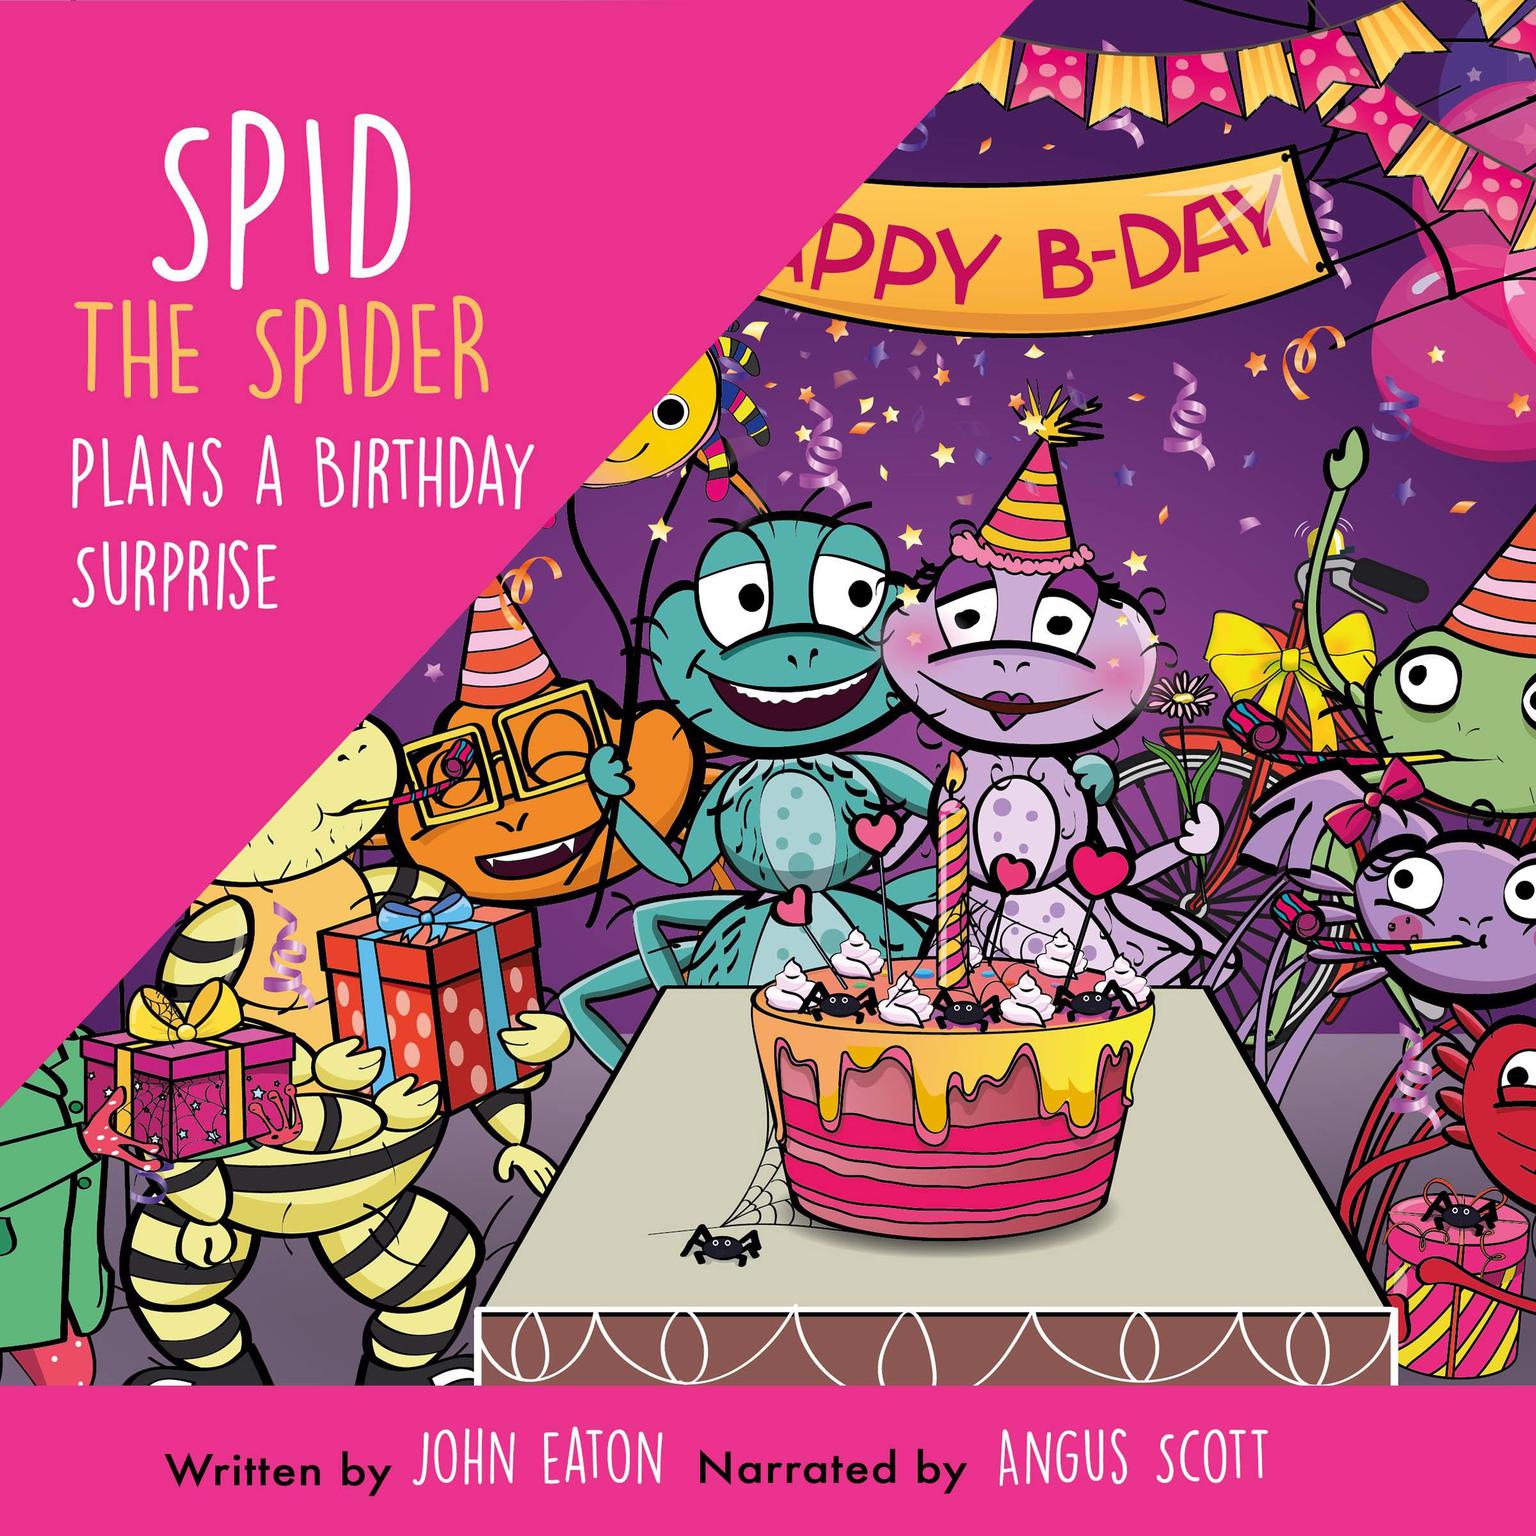 Spid the Spider Plans a Birthday Surprise Audiobook, by John Eaton